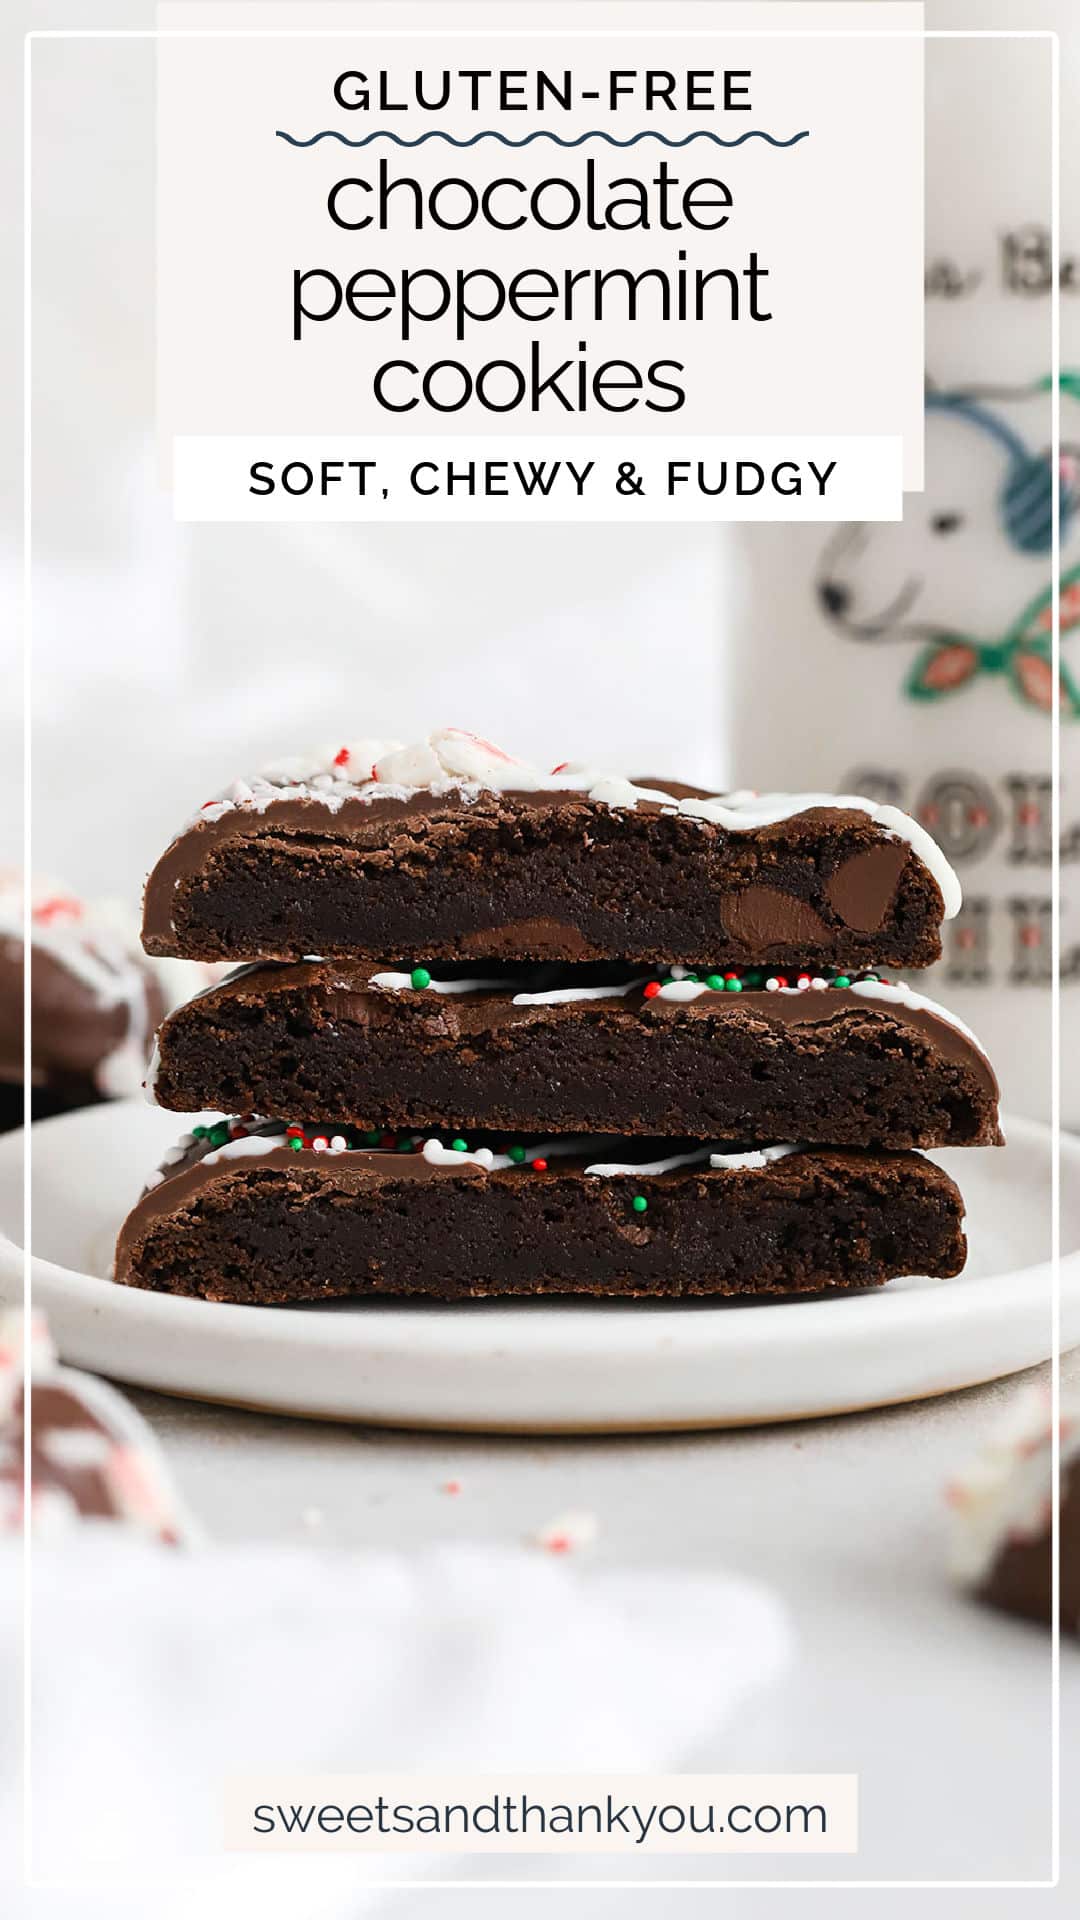 Gluten-Free Chocolate Peppermint Cookies - These fudgy gluten0free chocolate candy cane cookies have a brownie-like texture, a double dose of chocolate & a few fun finishes. A perfect holiday cookie! // gluten-free peppermint cookies / gluten-free holiday cookies / gluten-free christmas cookies / glute-free peppermint brownie cookies / gluten-free chocolate peppermint cookie recipe / gluten-free peppermint cookie recipe / gluten-free candy cane cookie recipe